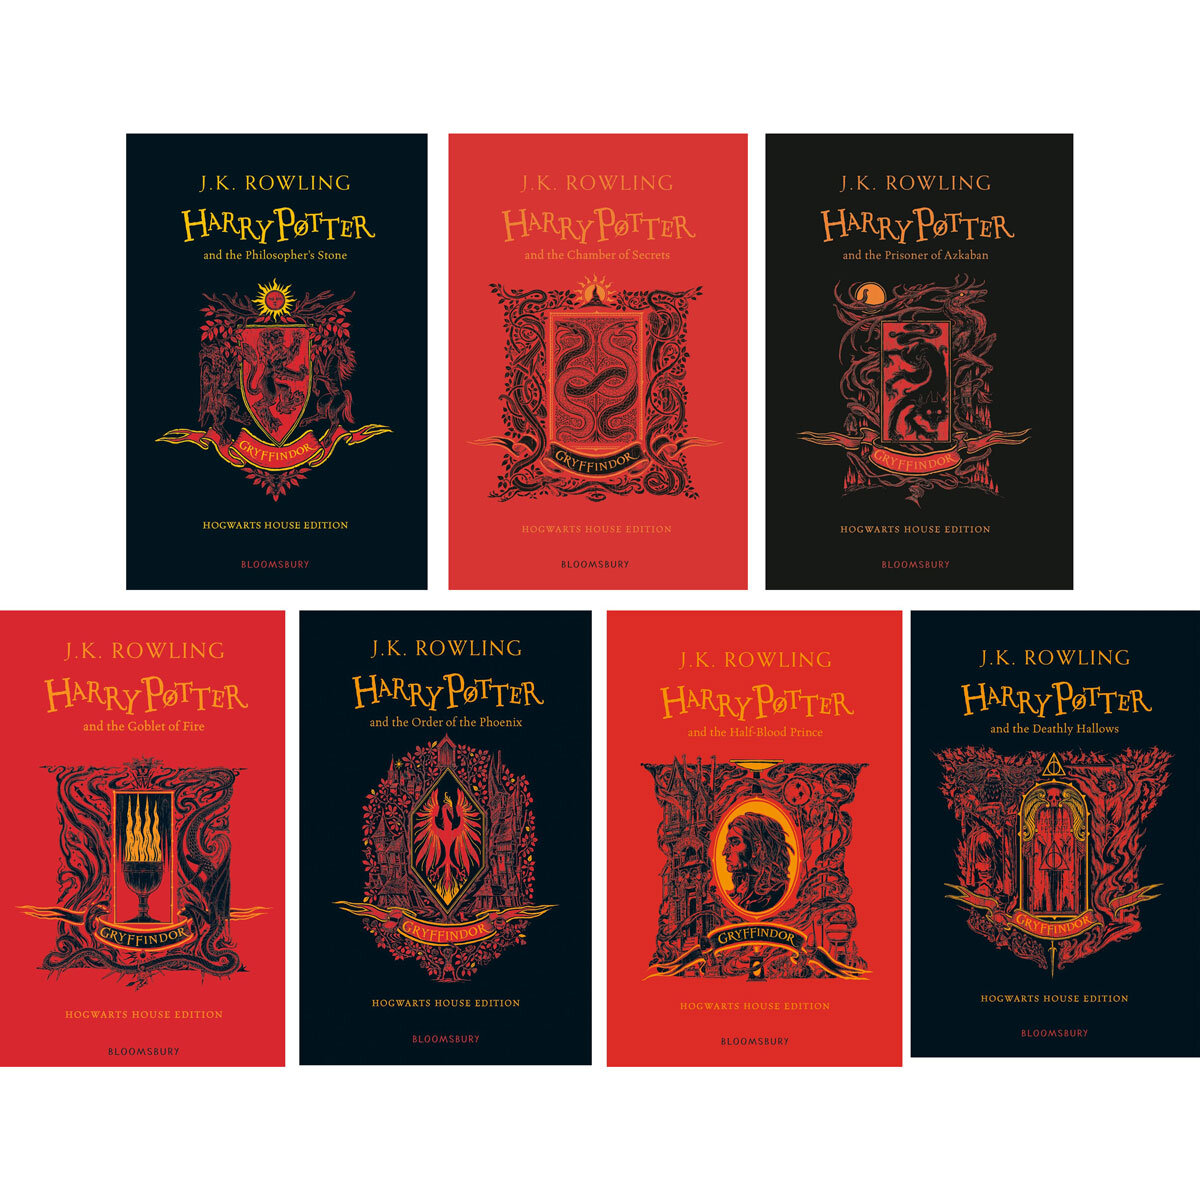 Bloomsbury release final set of Hogwarts House Editions with Harry Potter  and the Deathly Hallows